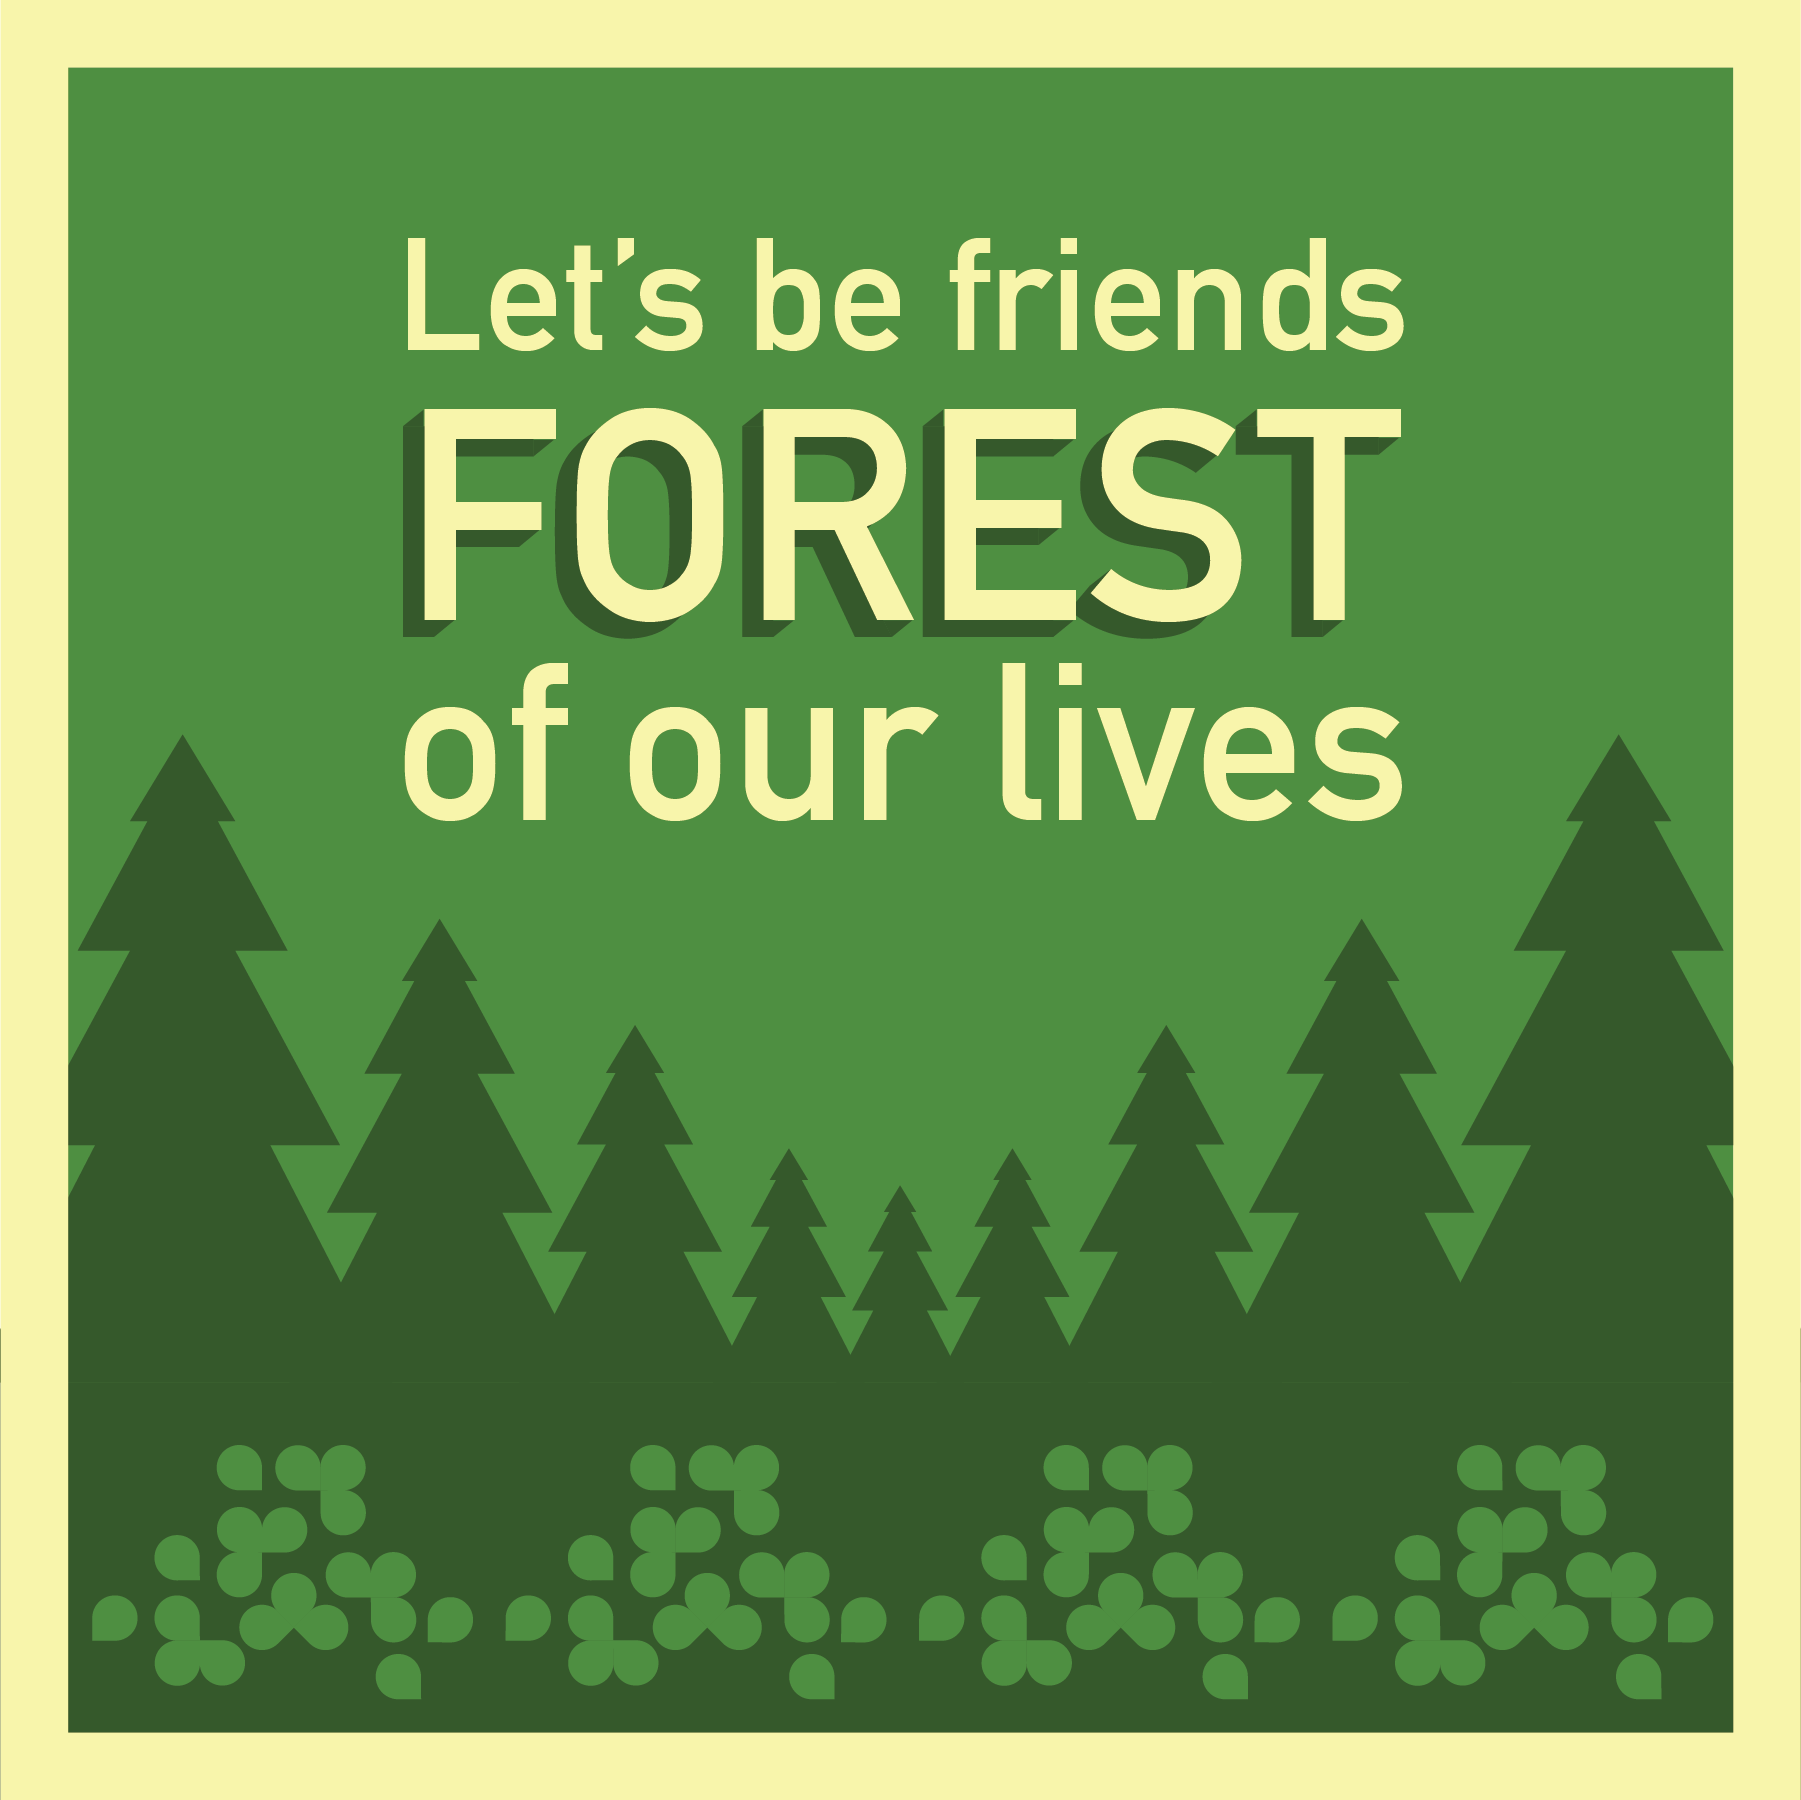 Let's be friends FOREST of our lives" with an image of a forest.